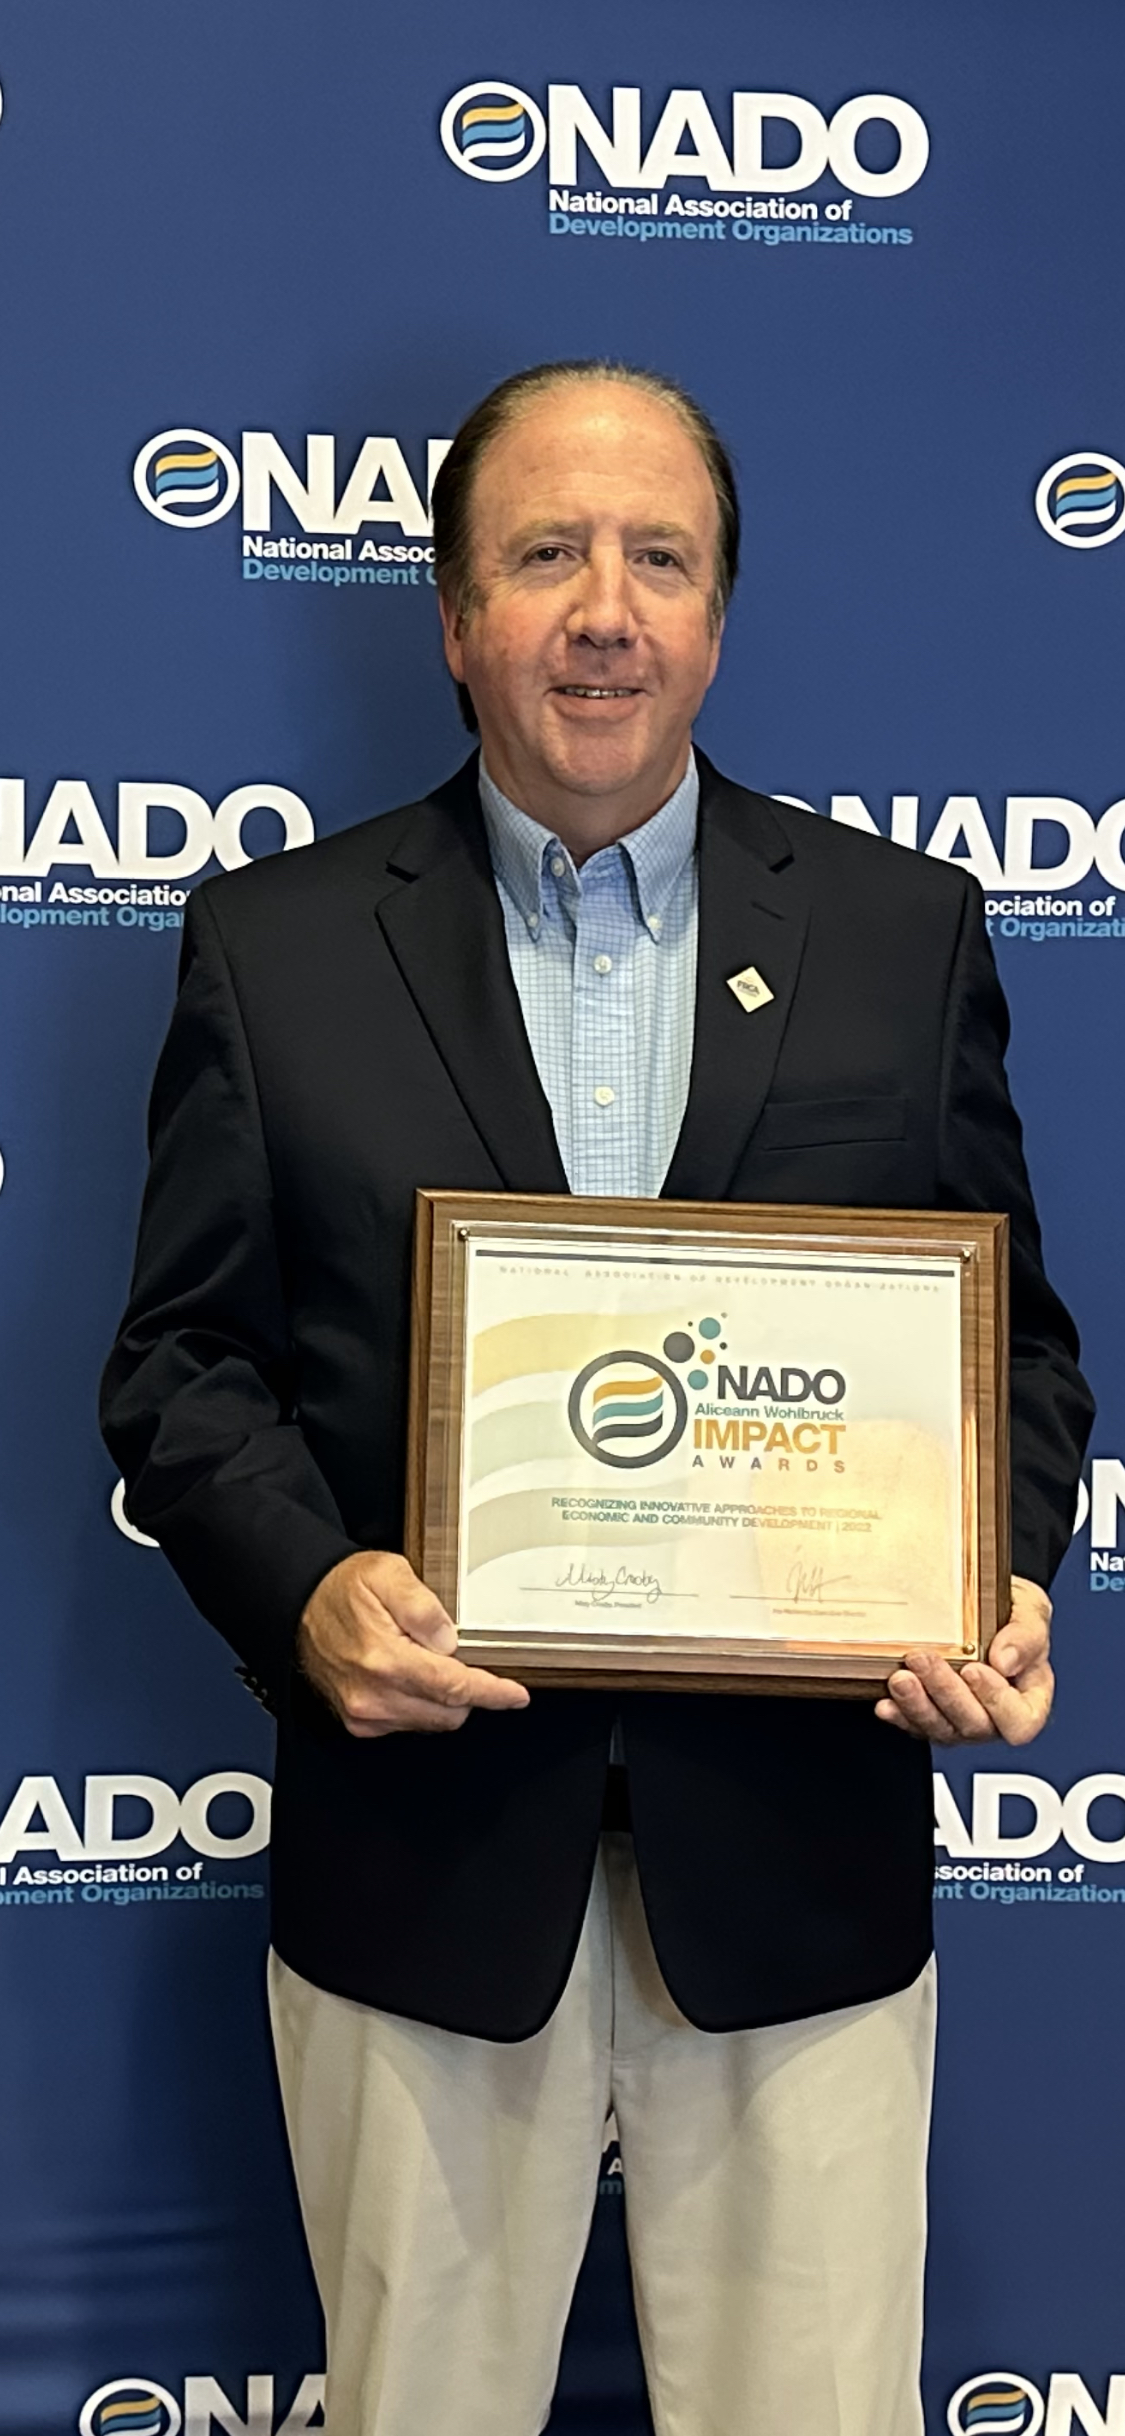 TBRPC received 2 NADO Impact Awards at the 2022 annual conference